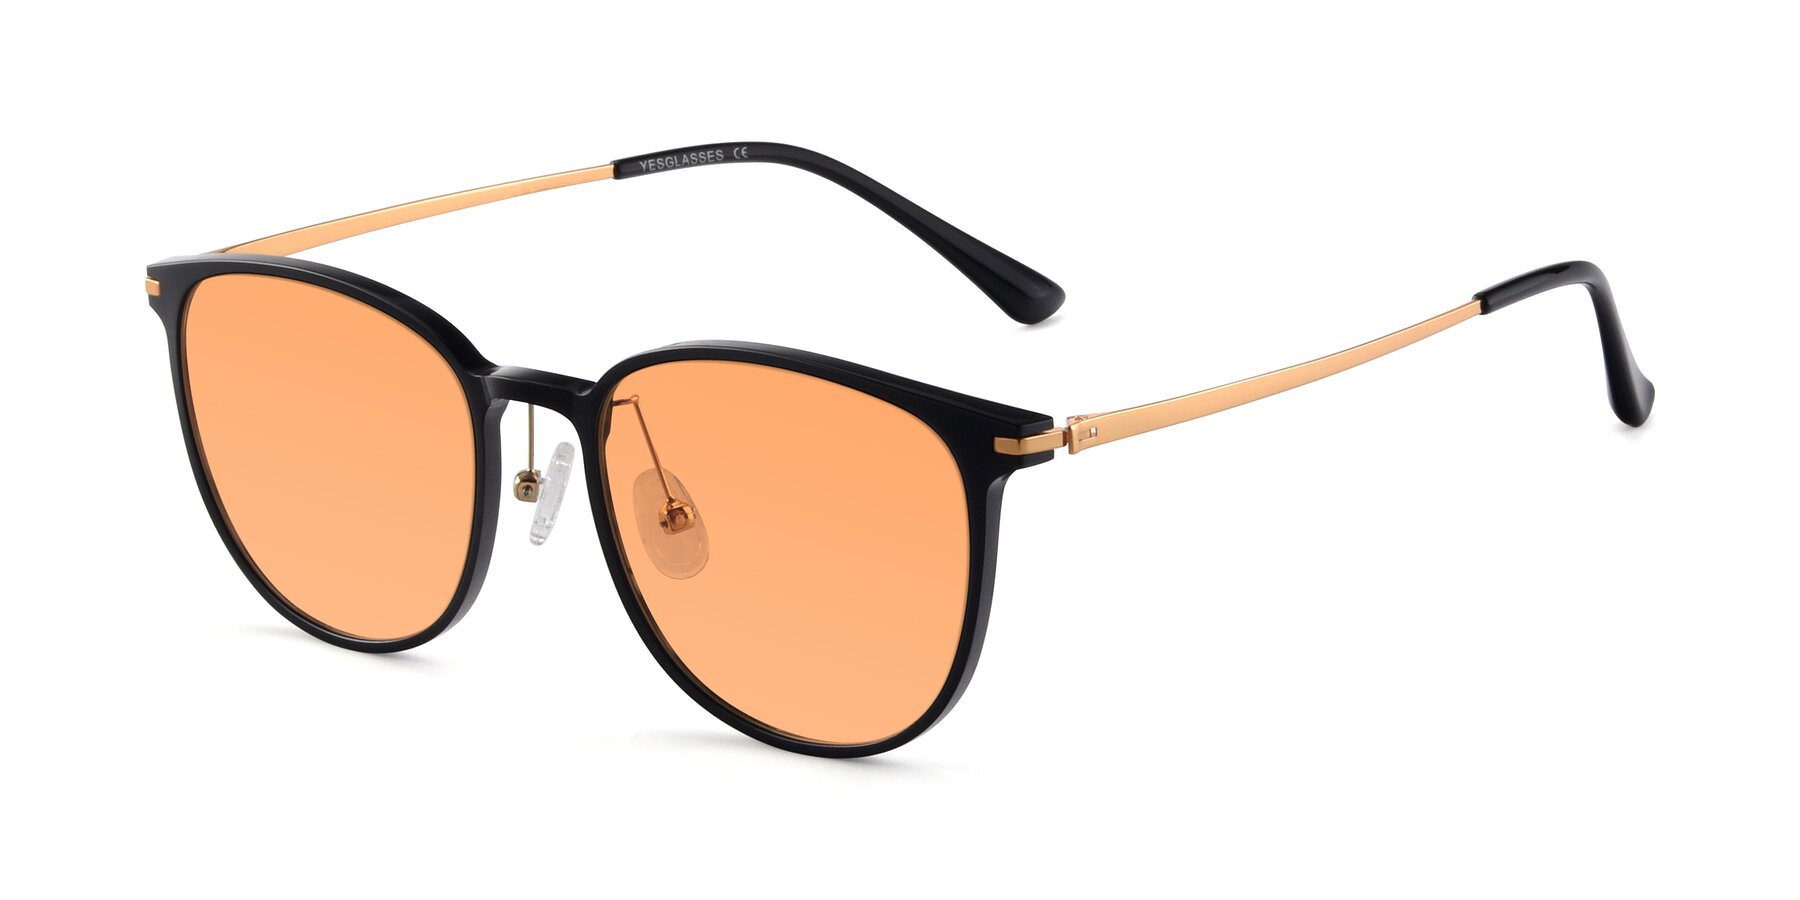 Angle of Justice in Black with Medium Orange Tinted Lenses